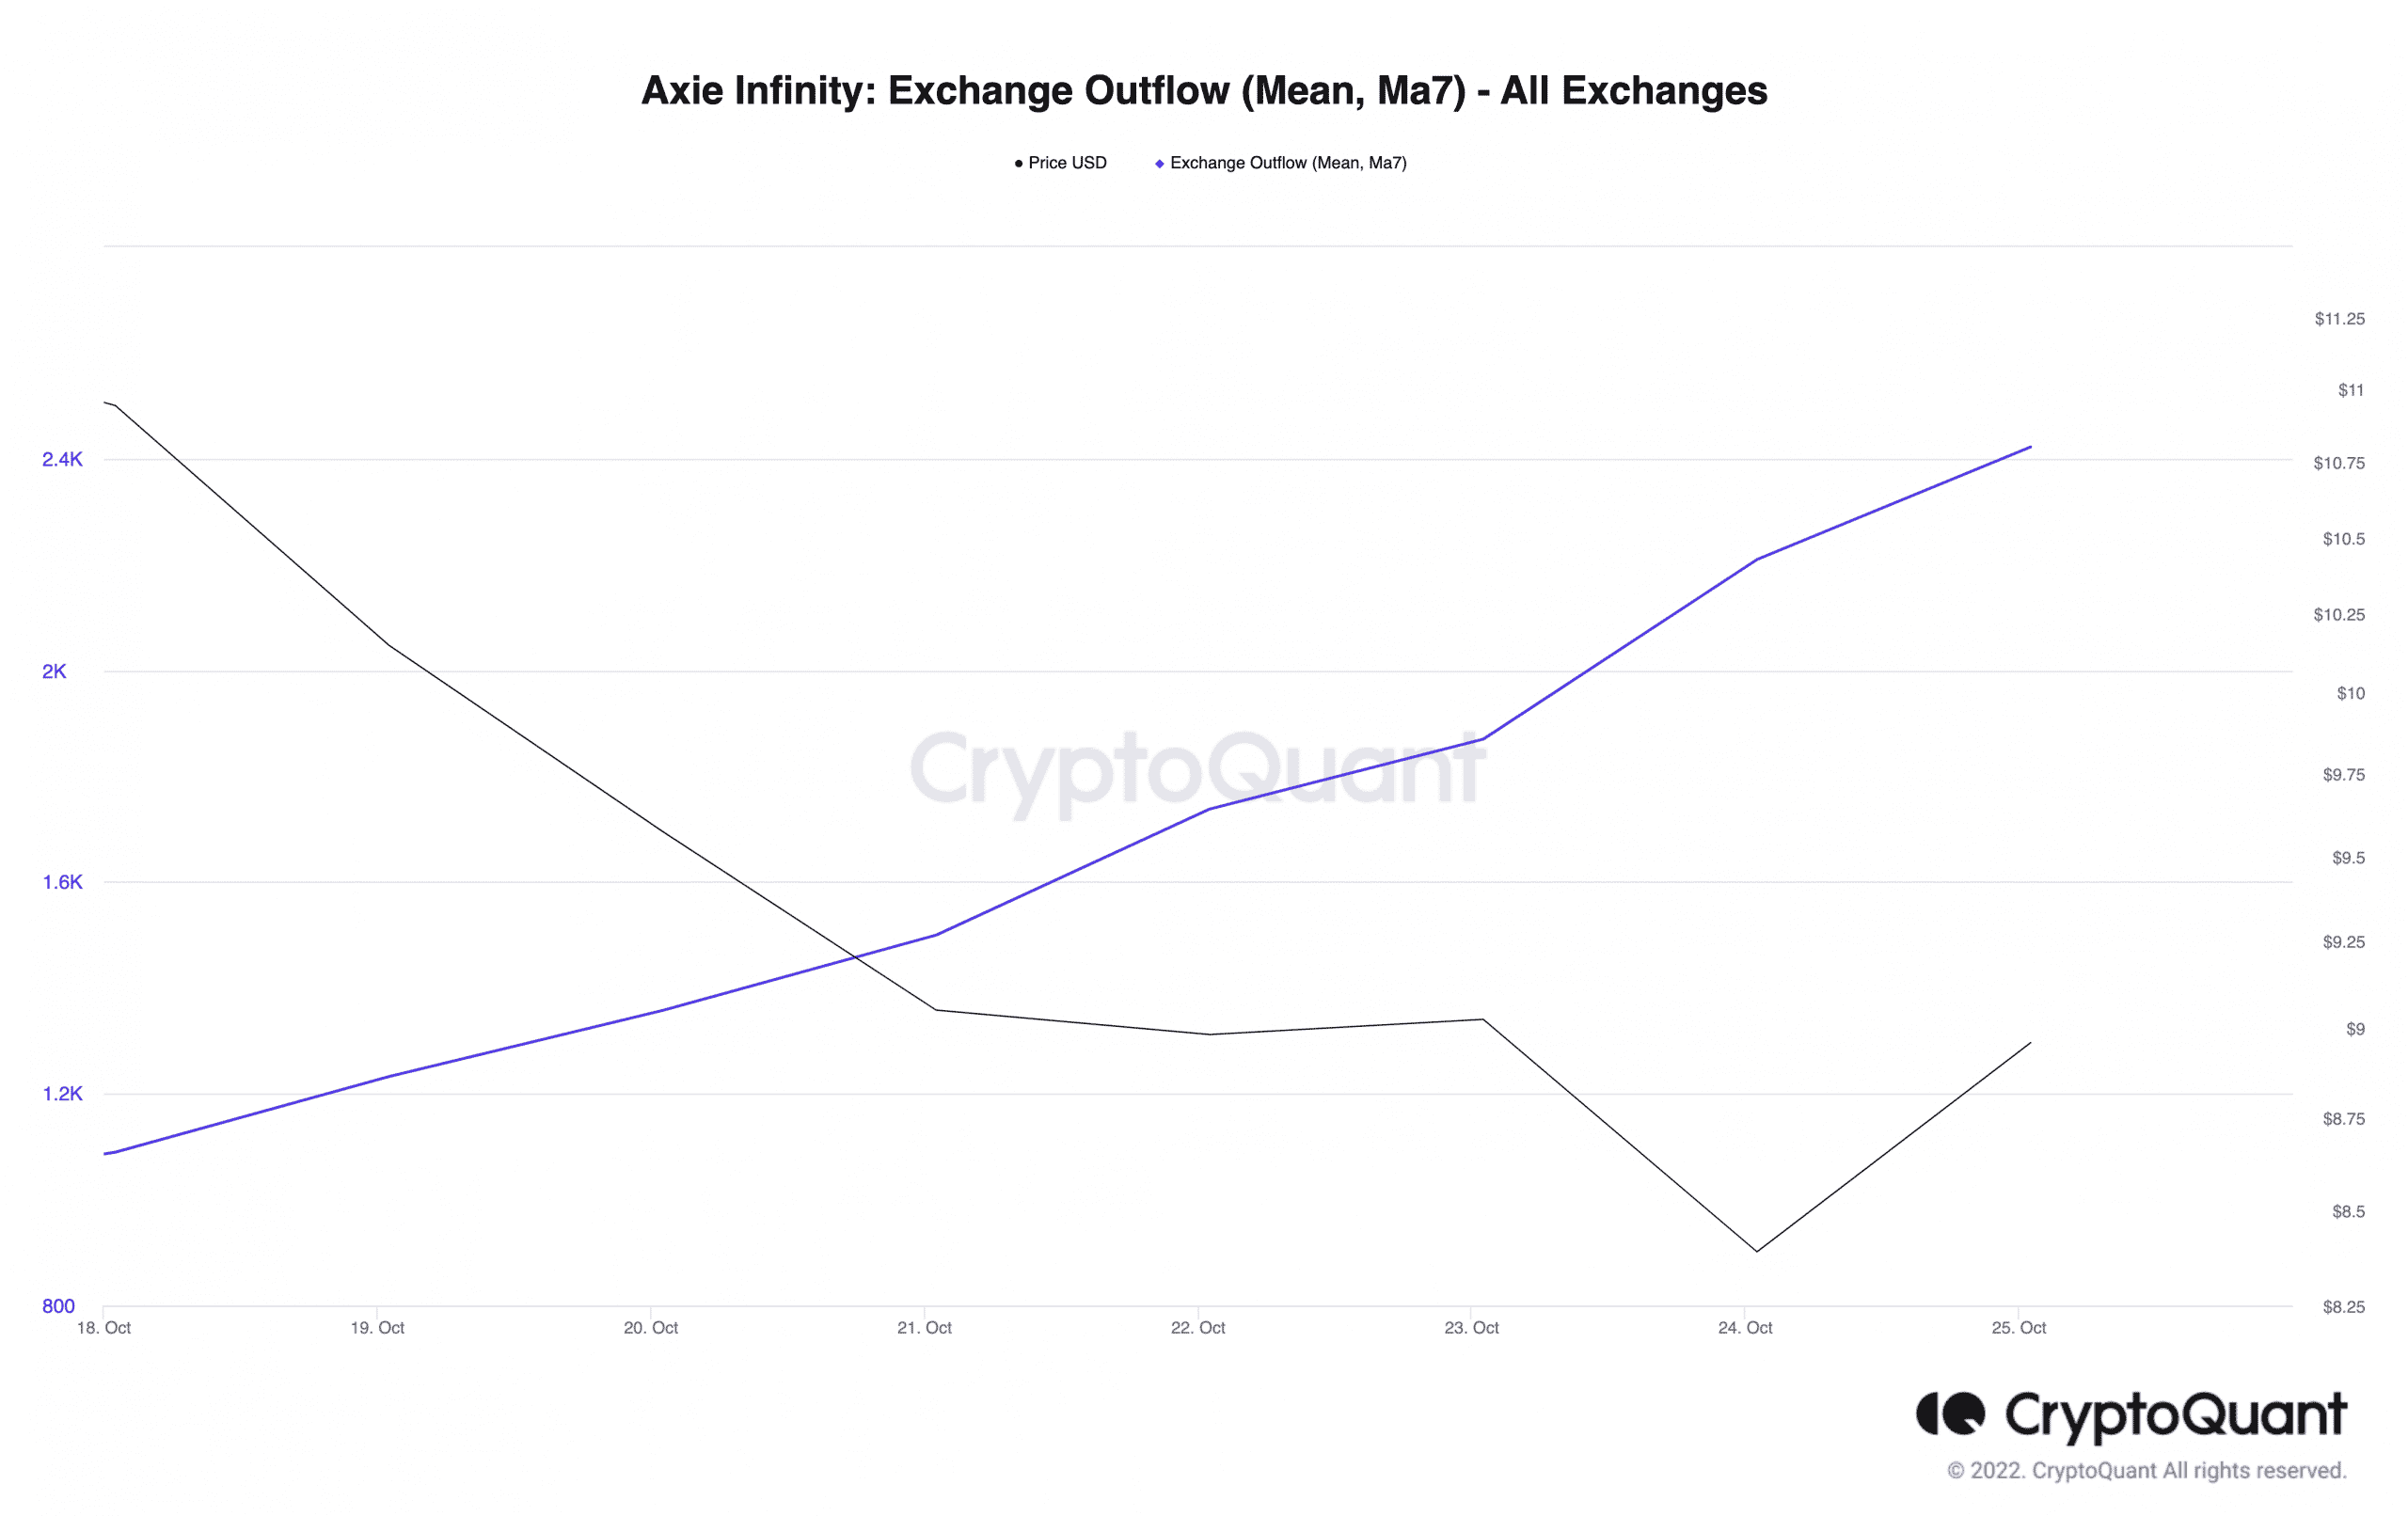 Chart showing Axie Infinity exchange outflow